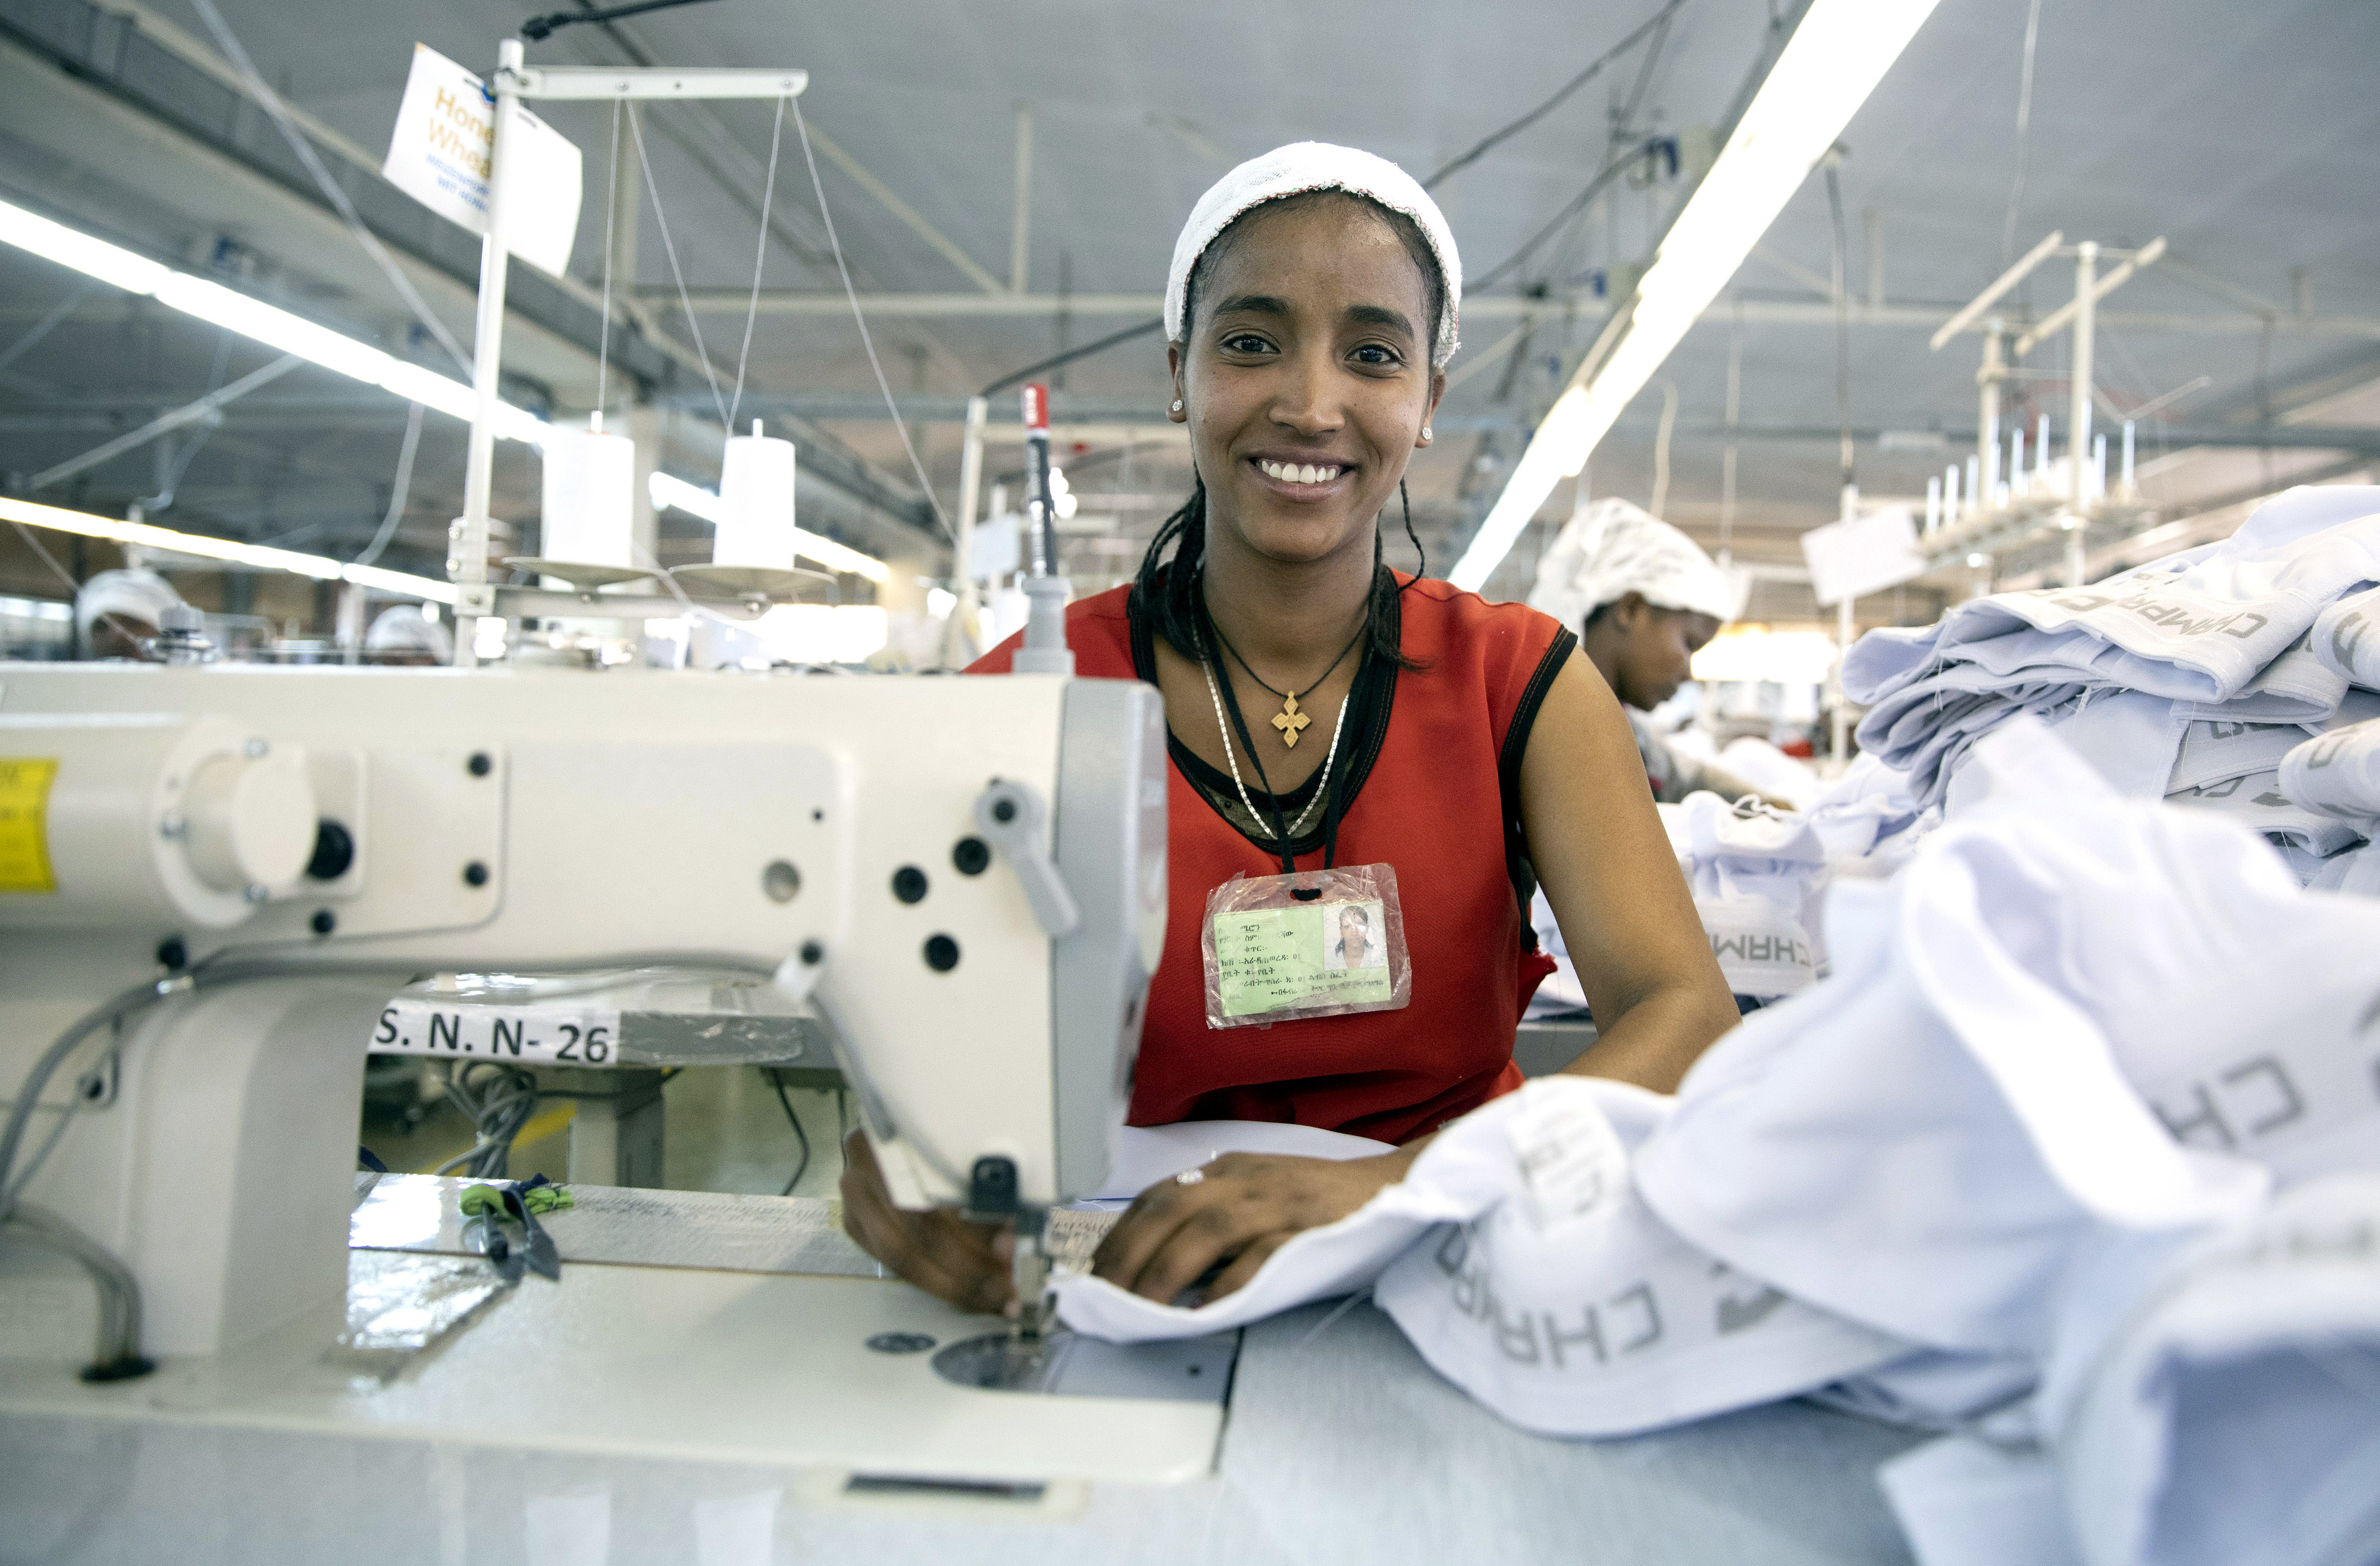 Seamstress in the textile factory of the Desta Garment company in Addis Ababa, which produces for a German retail chain, Ethiopia, 2.12.2019